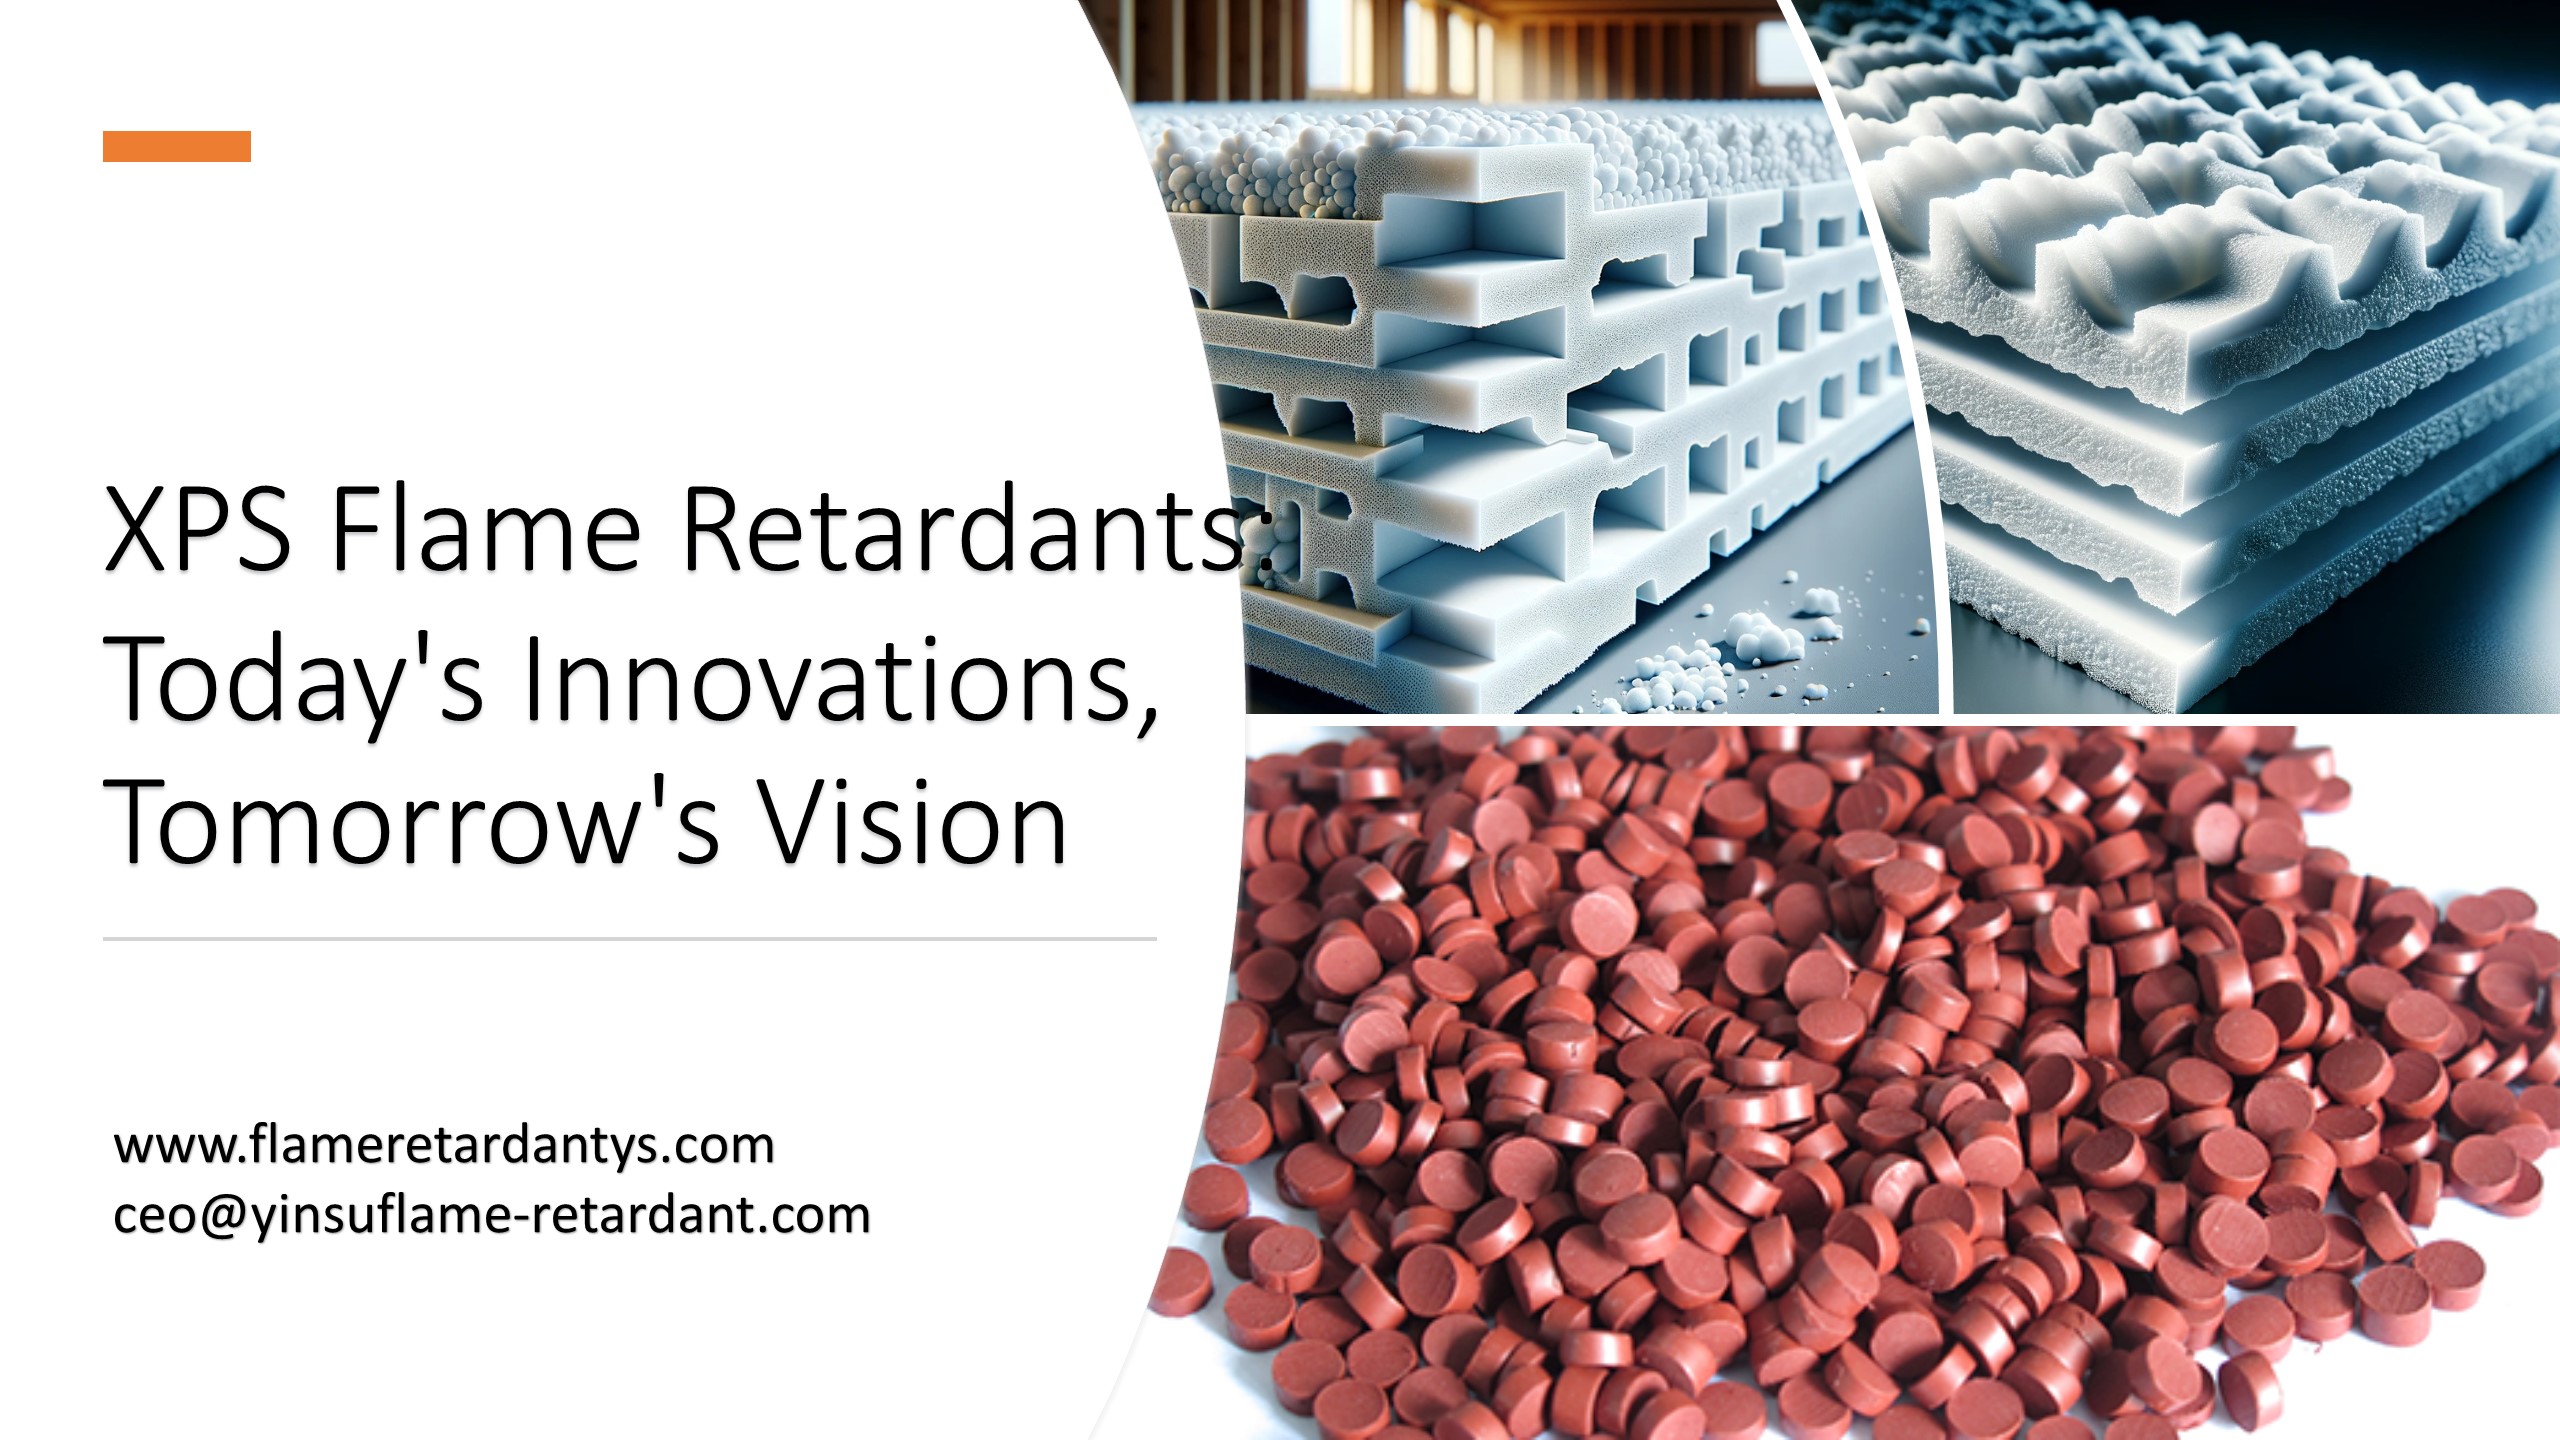 XPS Flame Retardants: Today's Innovations, Tomorrow's Vision